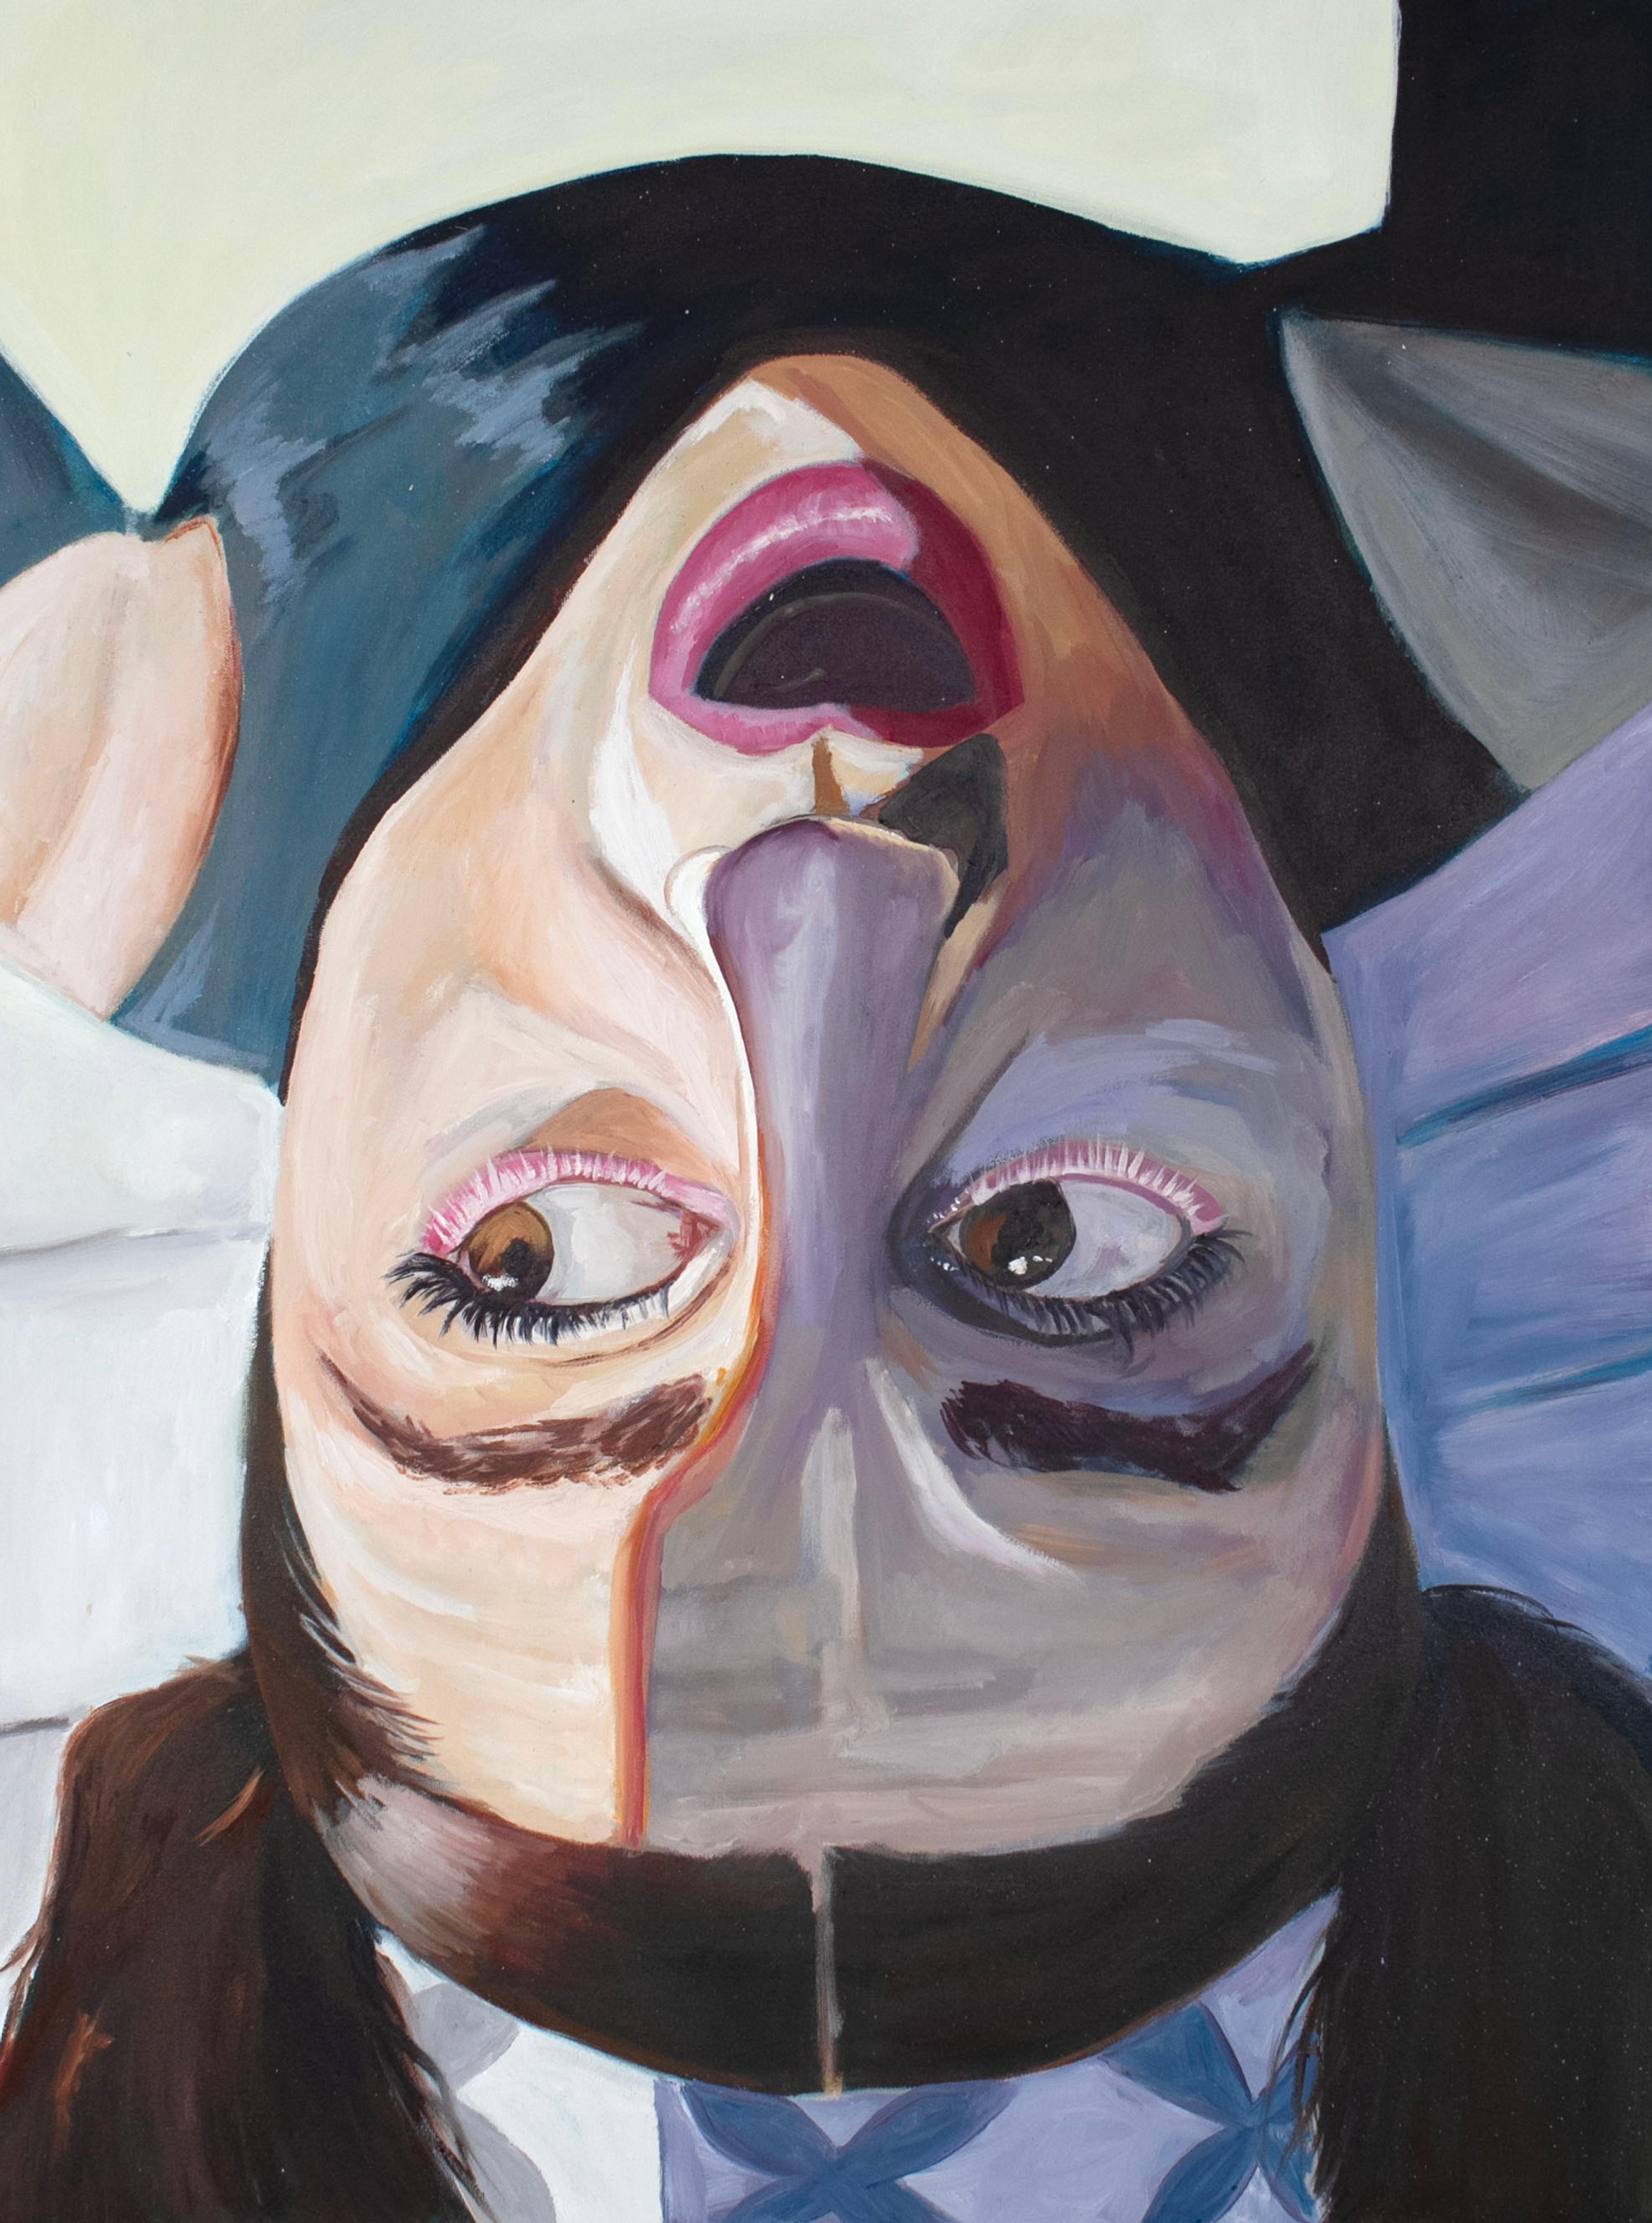 Oil-on-canvas self-portrait of an adolescent girl lying on her back on a bed with her head hanging upside down off the edge, facing the viewer. The girl's lips are red, and her mouth is wide open. She has thick eyebrows and brown eyes that face left. Her dark hair is tied in two pigtails which hang upside down. The girl wears a black shirt, and the edges of her upraised arms are shown extending out of the frame, as though she is holding a smartphone and taking a selfie. She wears a white headband with blue decorative four sided flower patterns. Her face is cast in faint blue purple  shadow to the right, which contrasts to her light pinkish skin to the left.